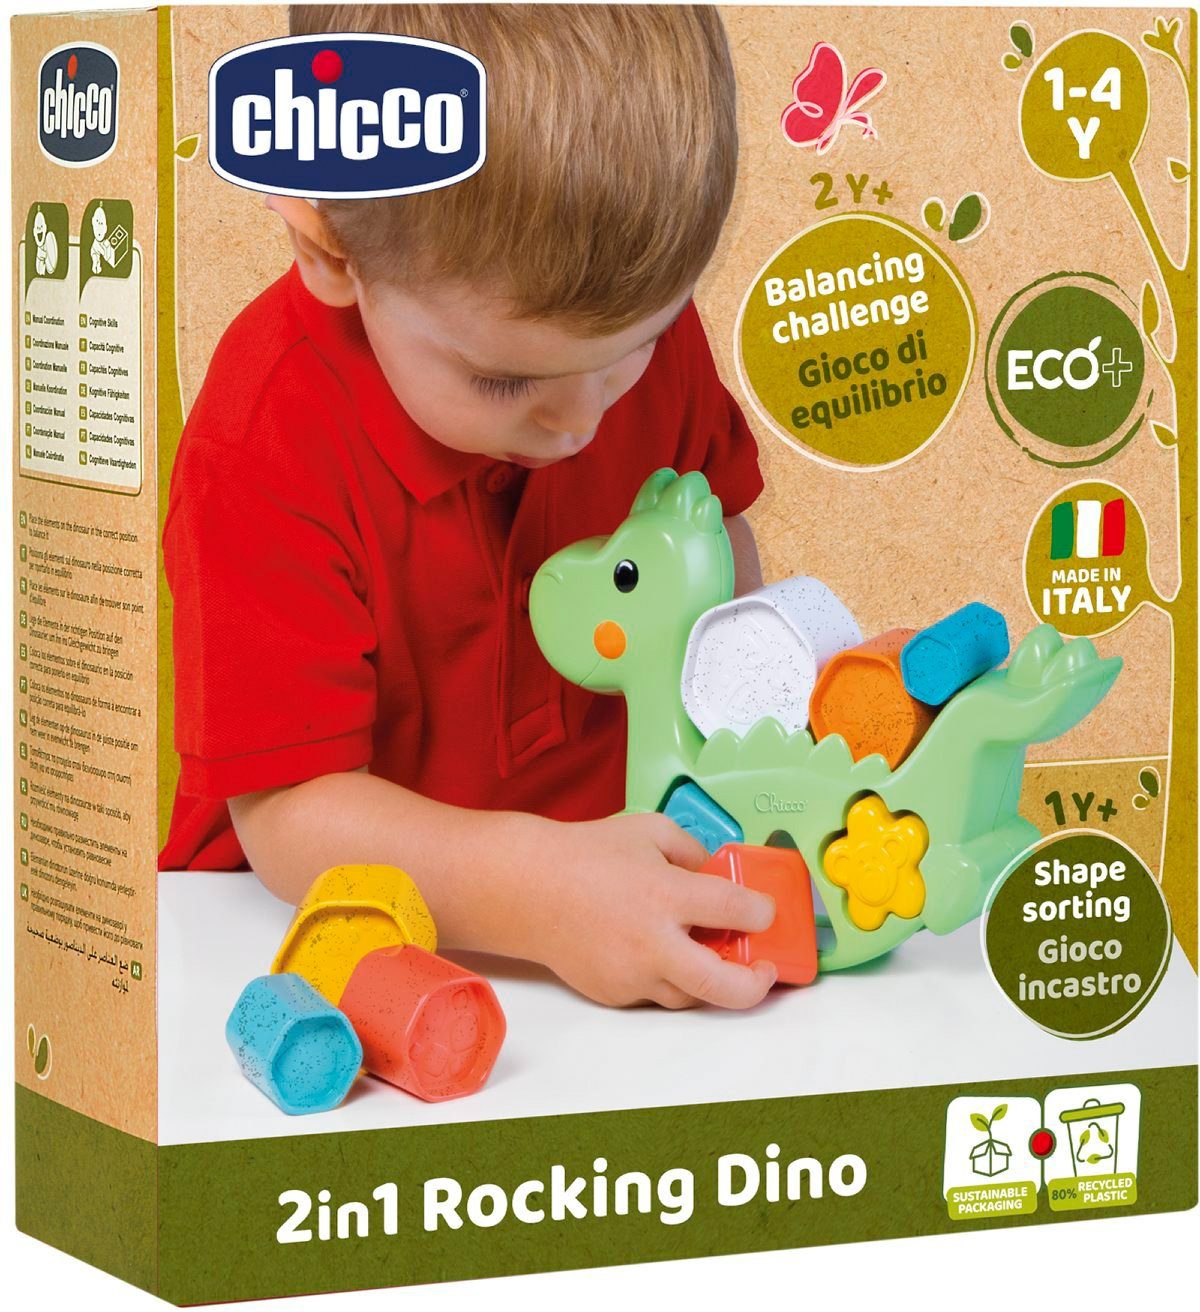 Chicco Lernspielzeug 2 In 1 teilweise recyceltem Europe Material; in Made Schaukeldino, aus